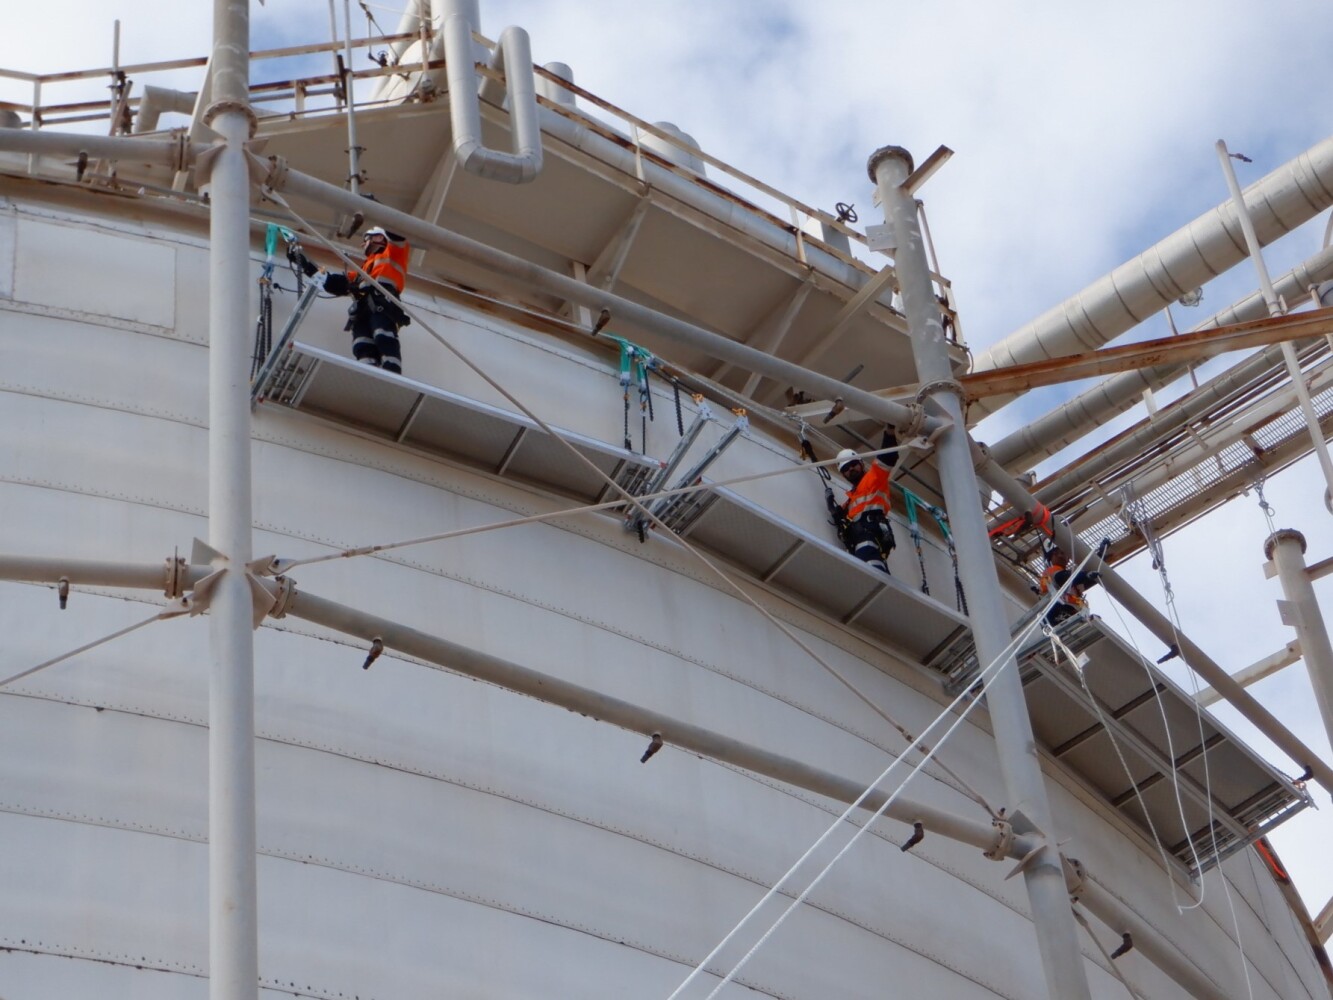 Wescott Uses Innovative Suspended Deck System to Remediate CUI on RLPG Tank